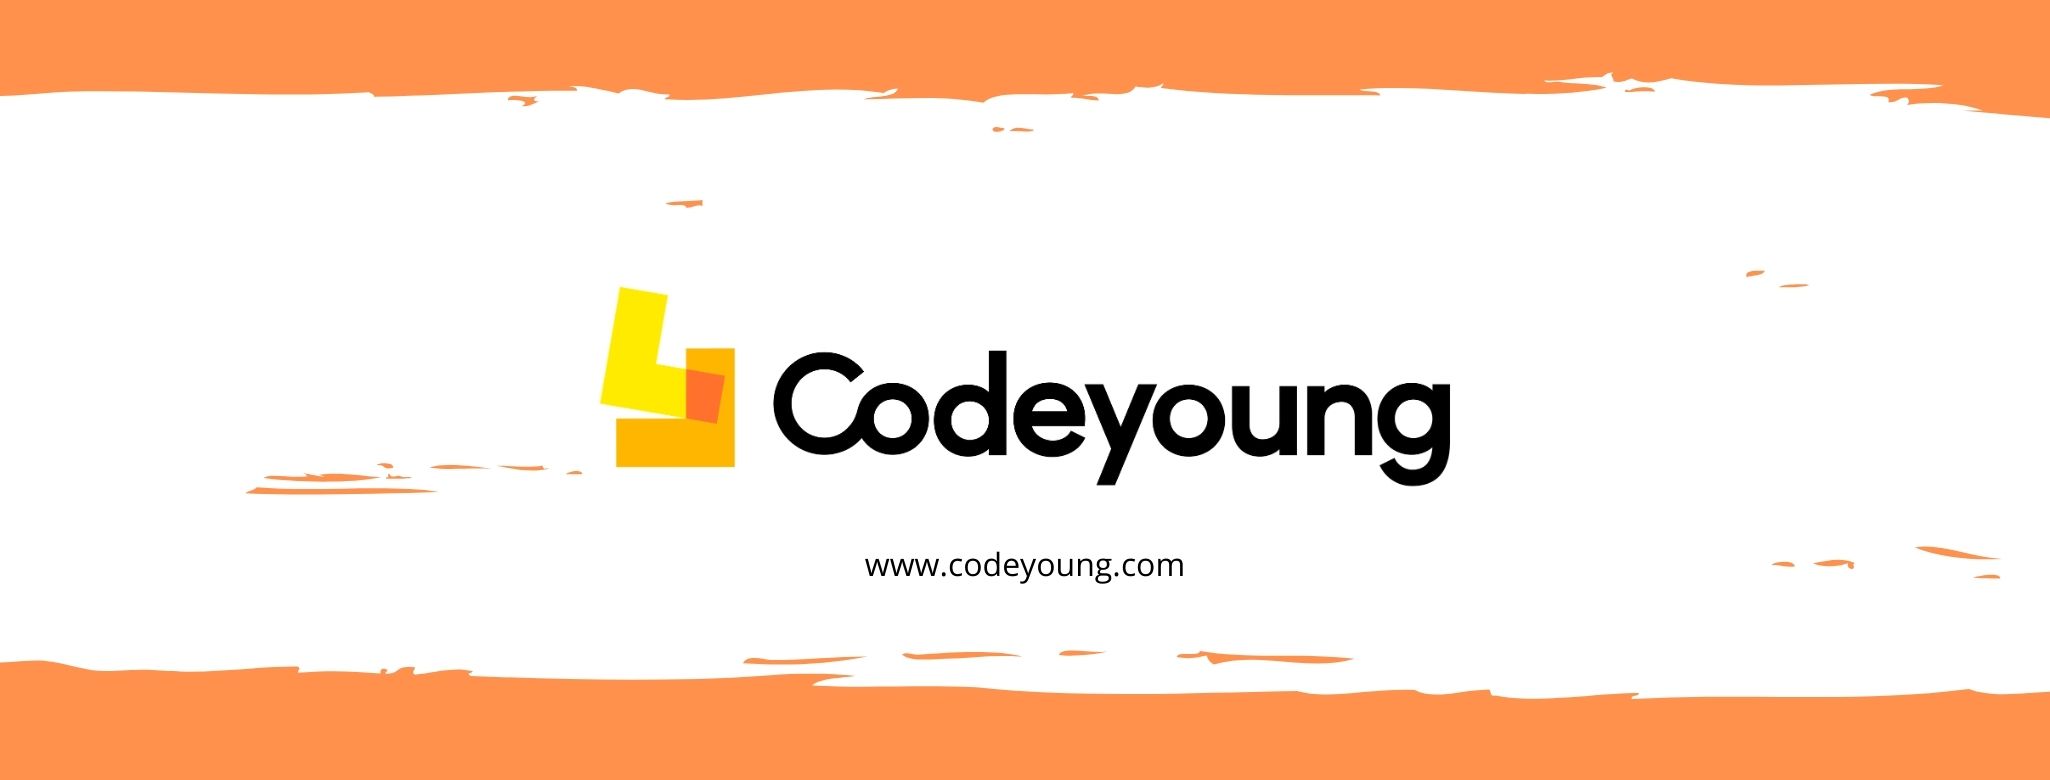 Learn to create Advanced level mobile apps for $25/class at Codeyoung